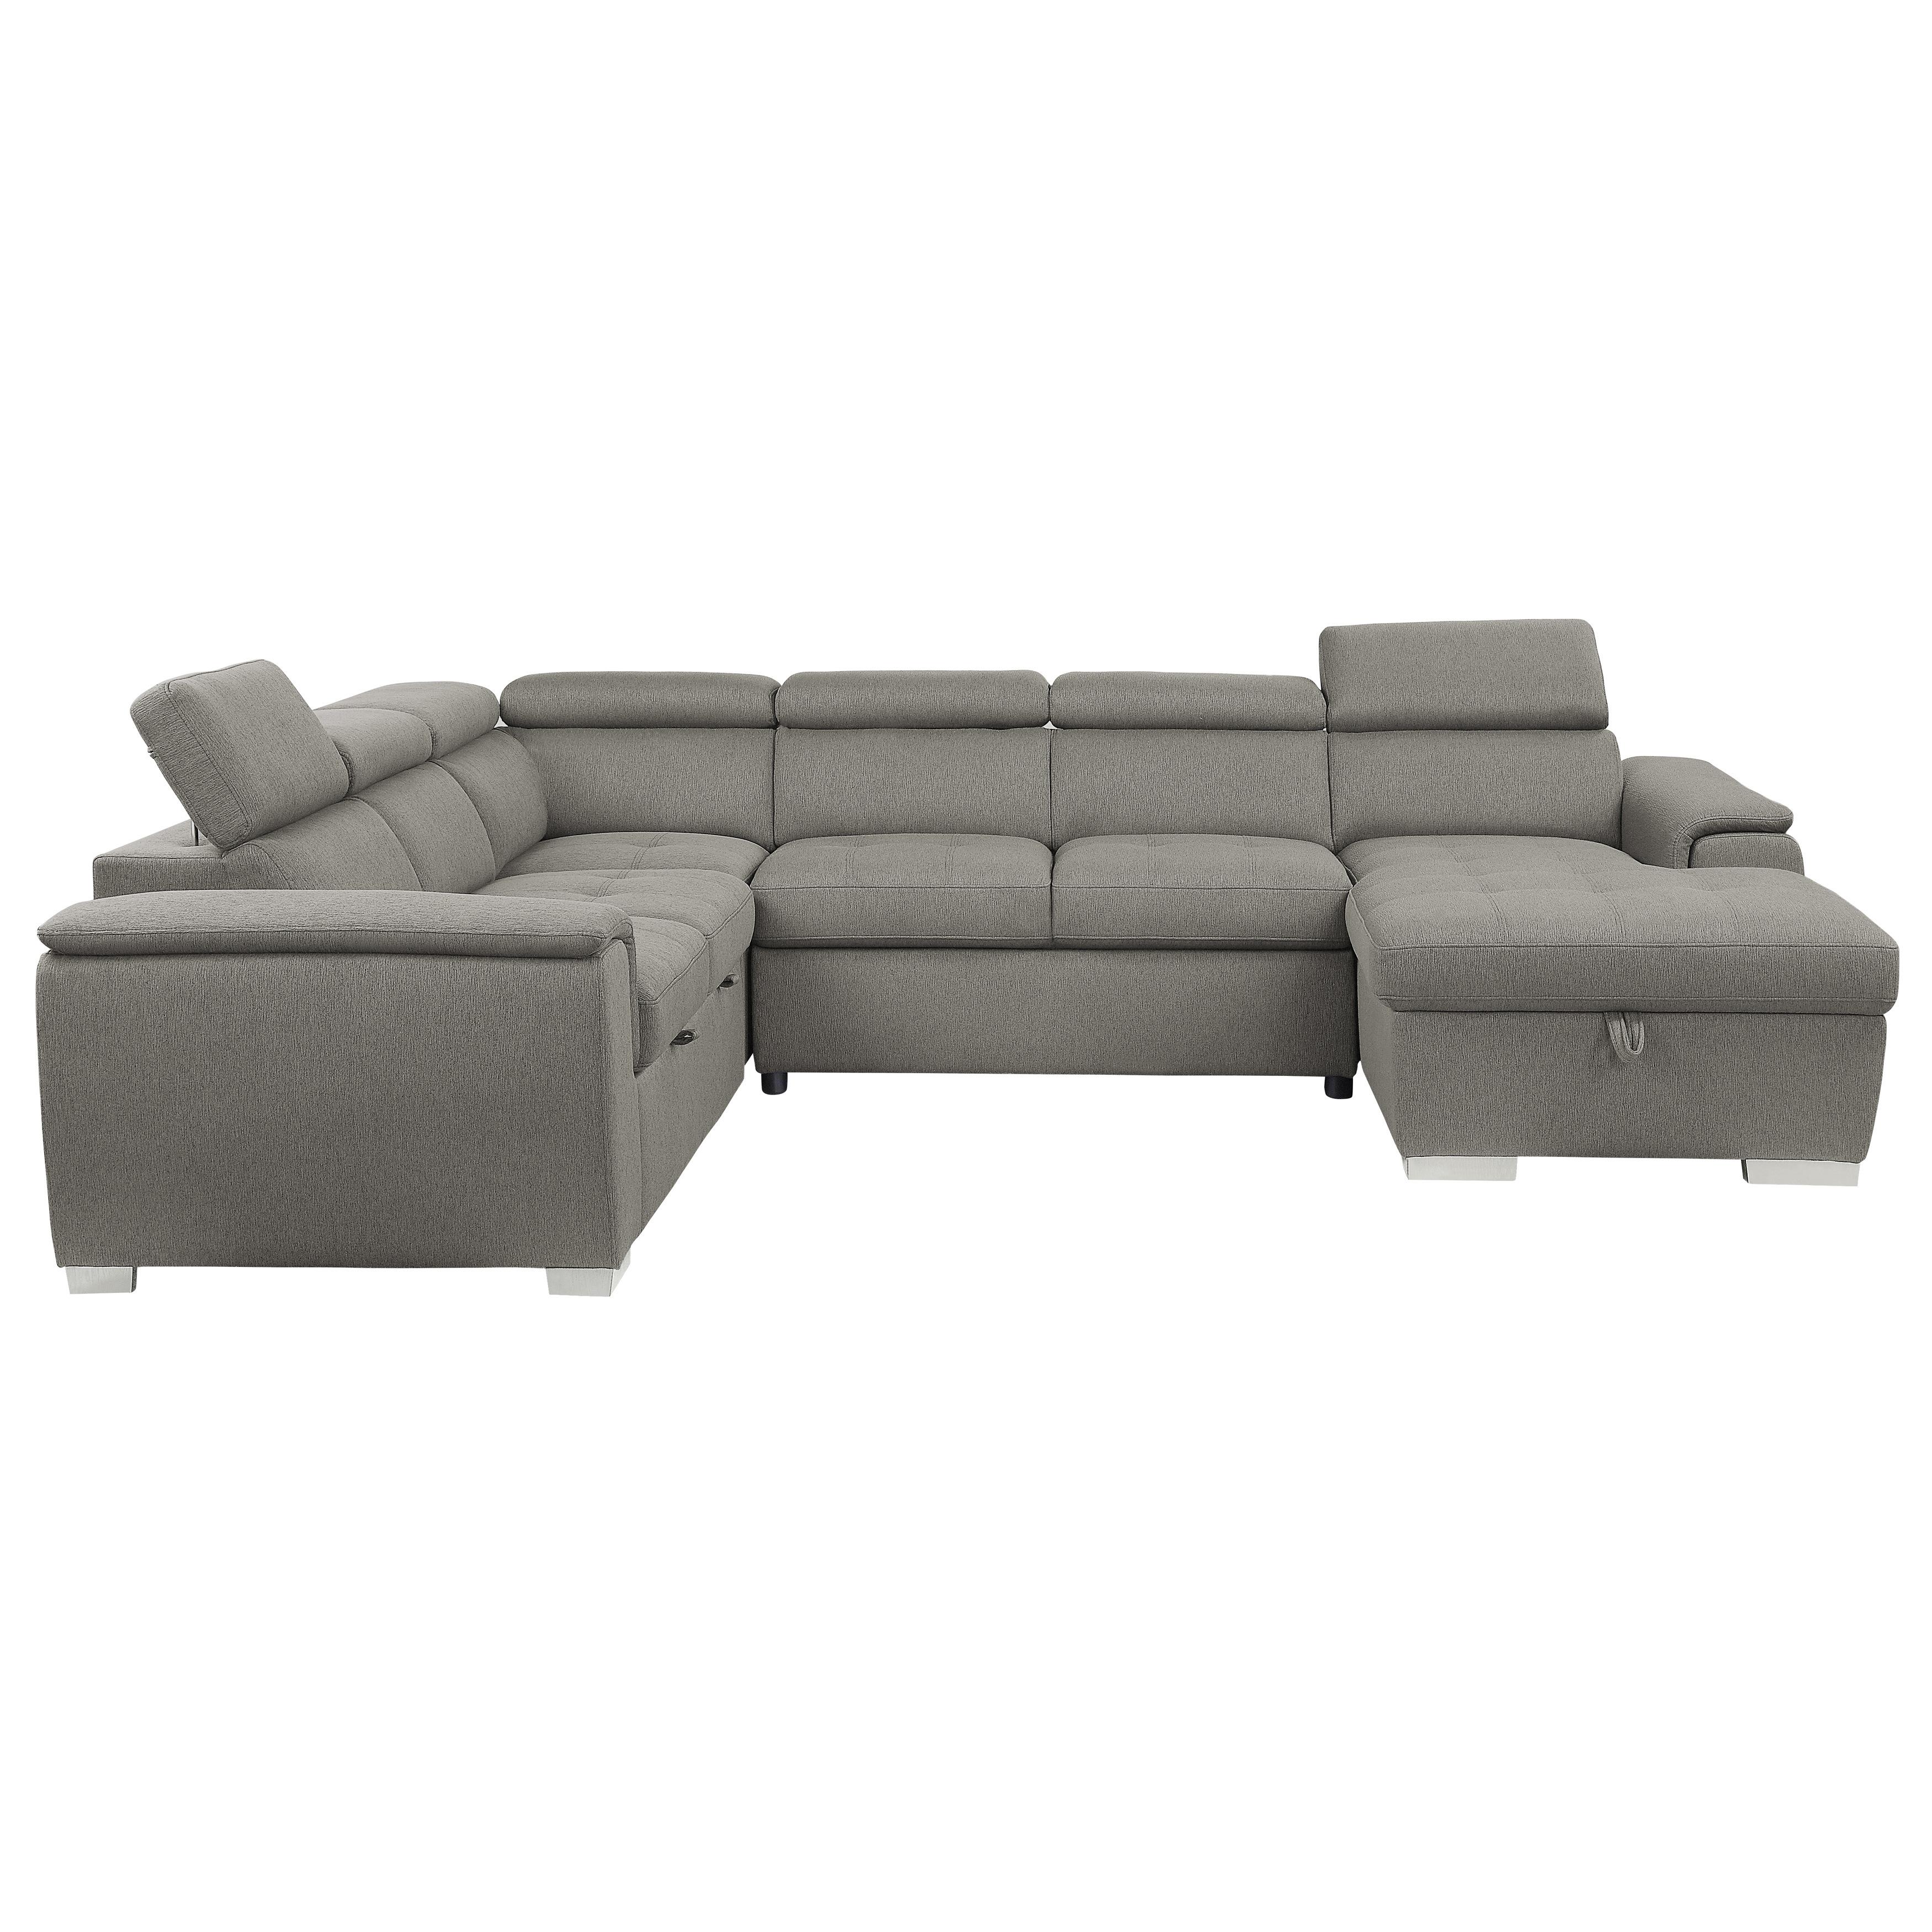 Contemporary Sectional 9355BR*42LRC Berel 9355BR*42LRC in Brown Chenille